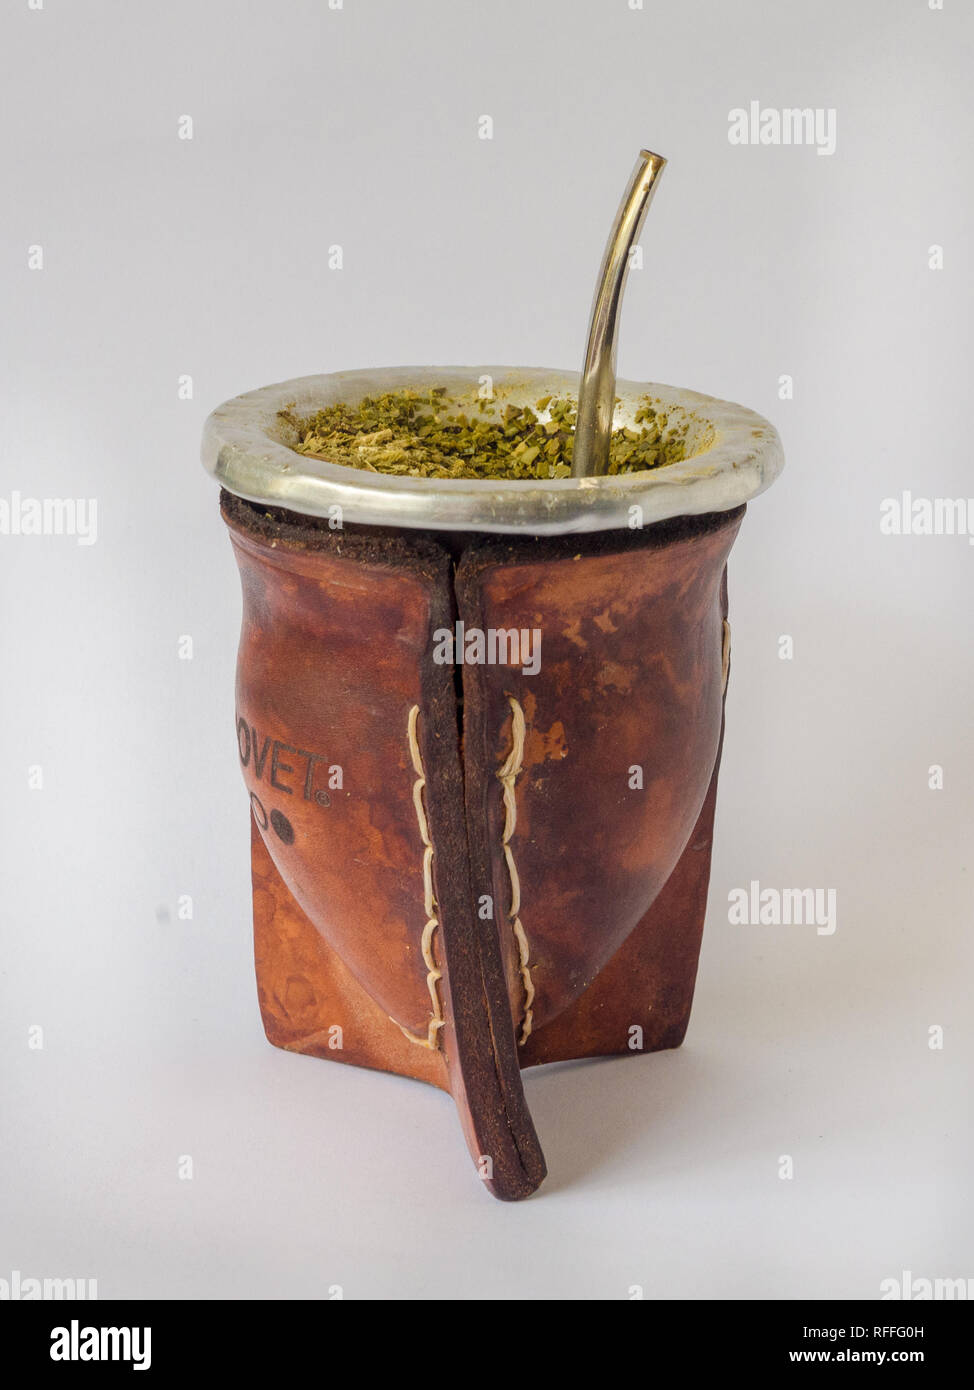 Mate or pumpkin to drink yerba mate infusions, detail Stock Photo